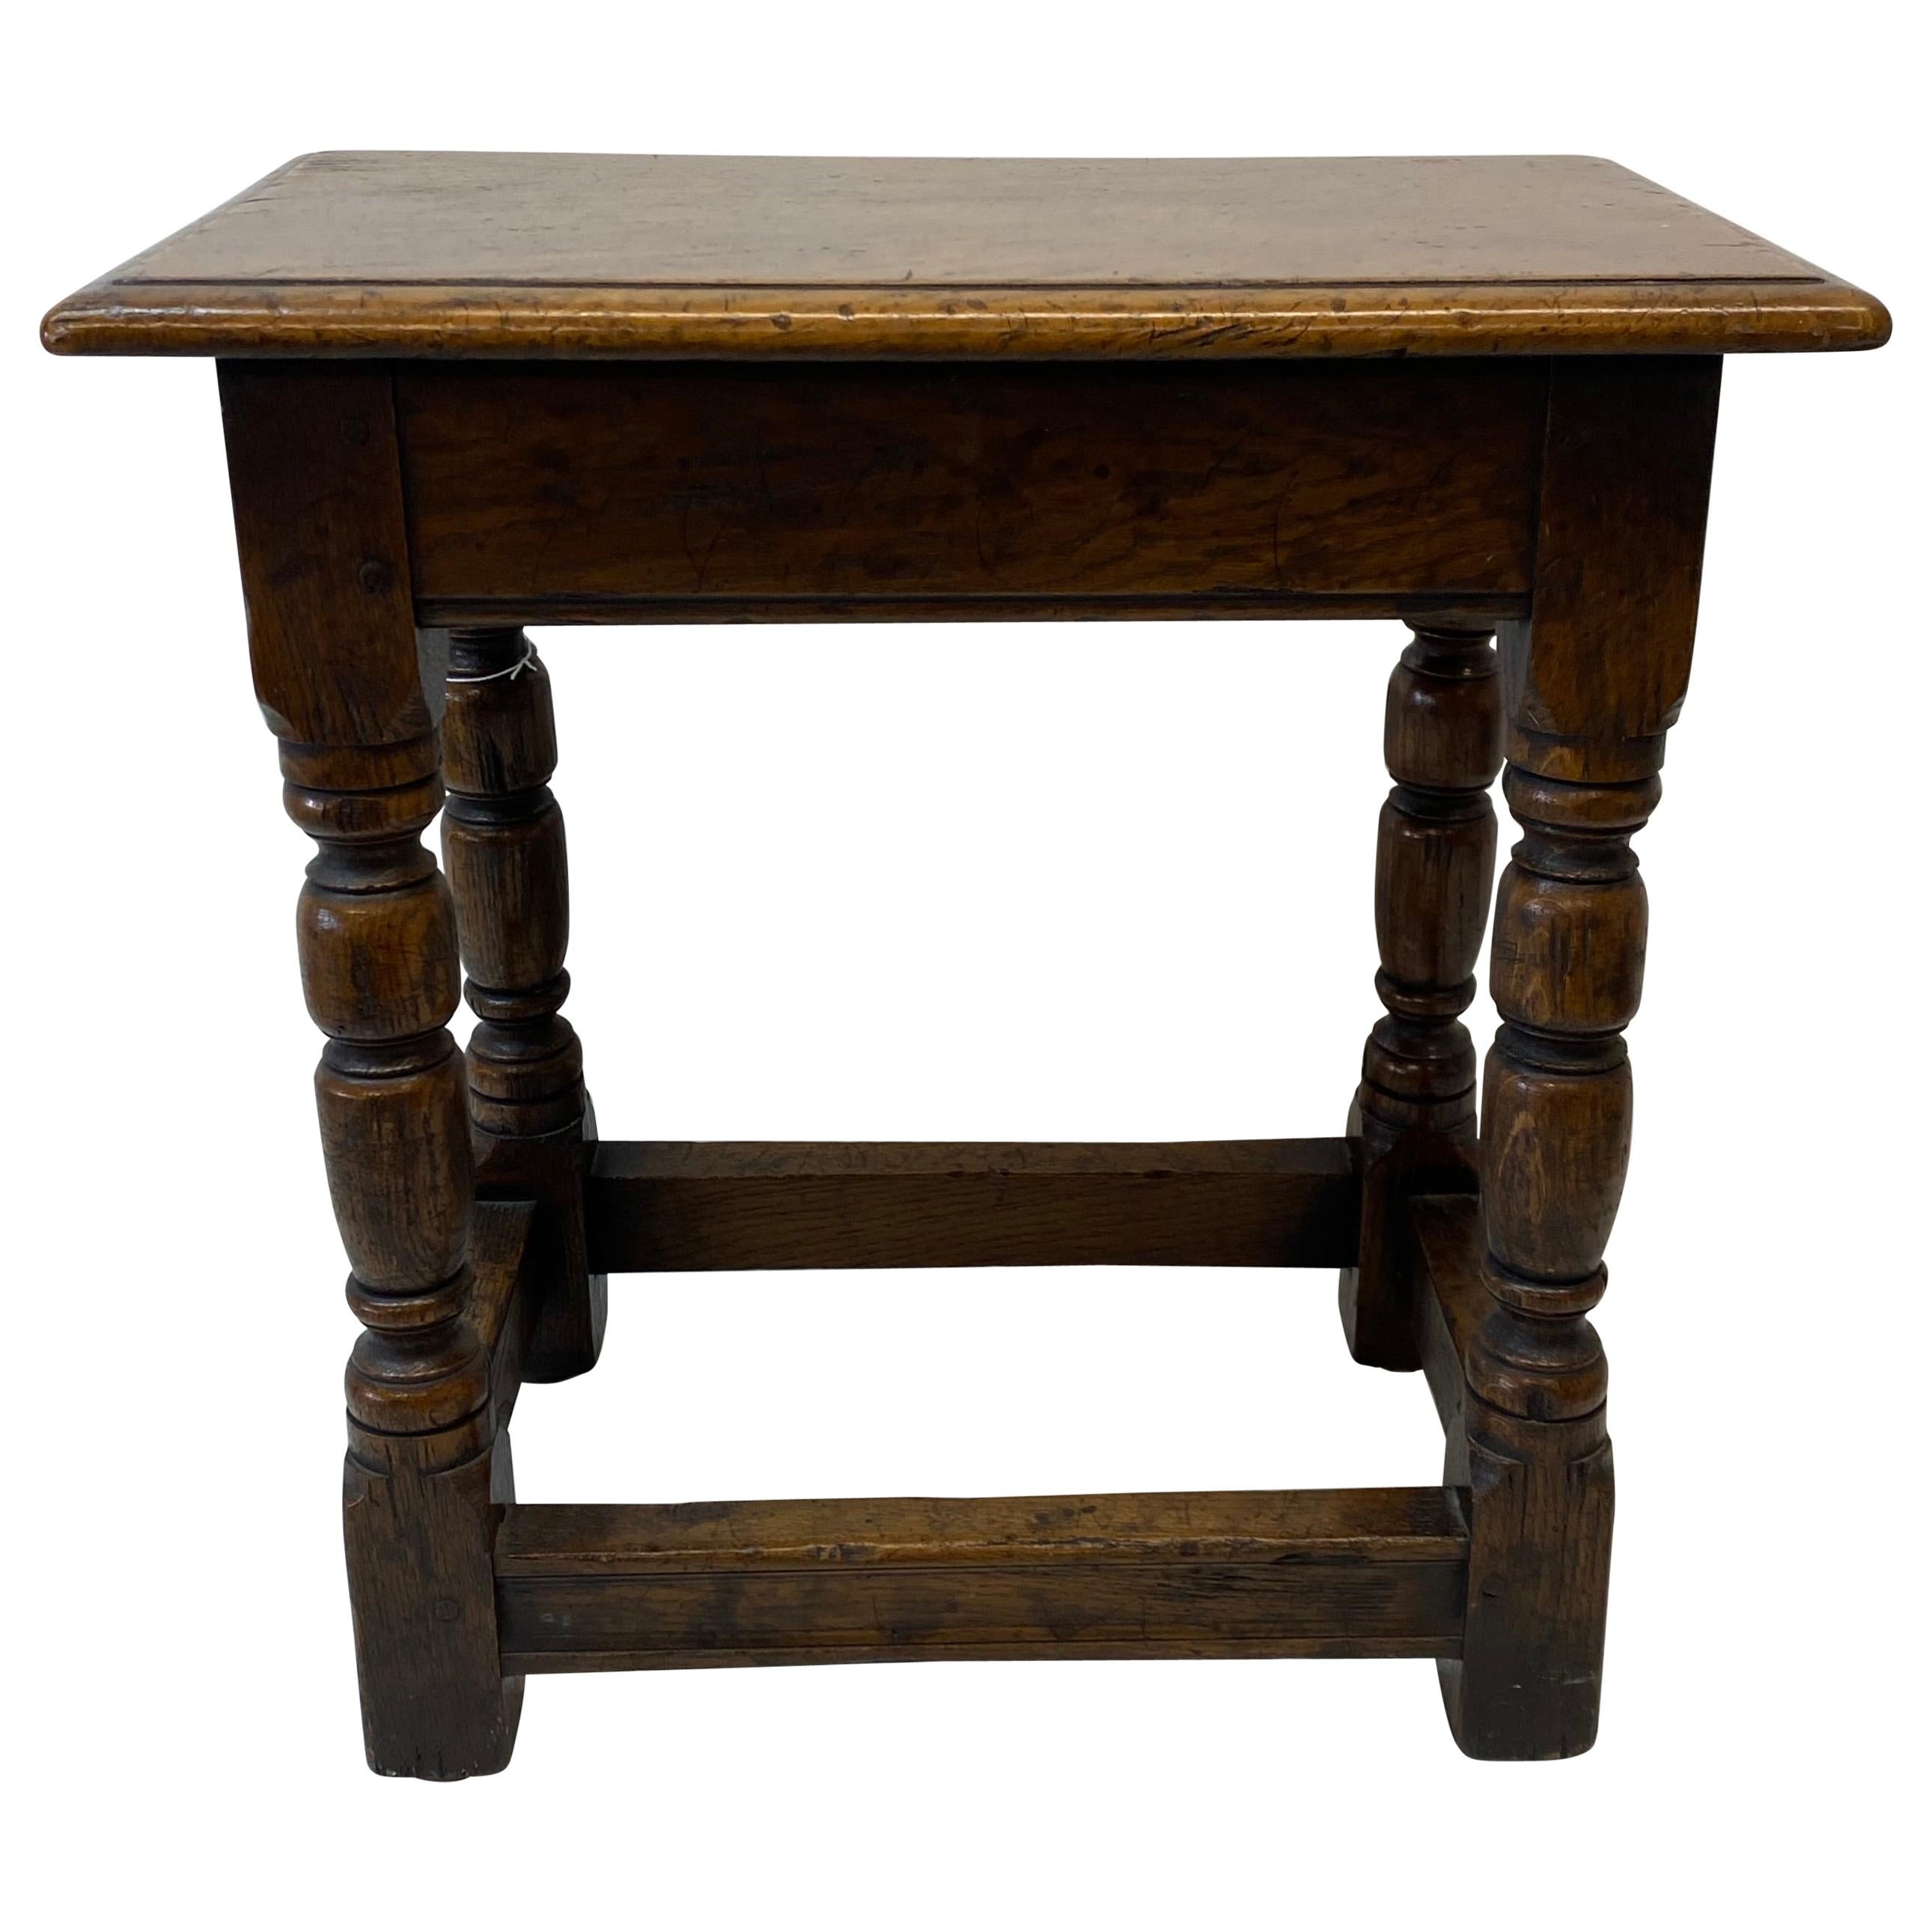 Mid 19th Century Hand Made Oak Bench / Side Table, C.1850